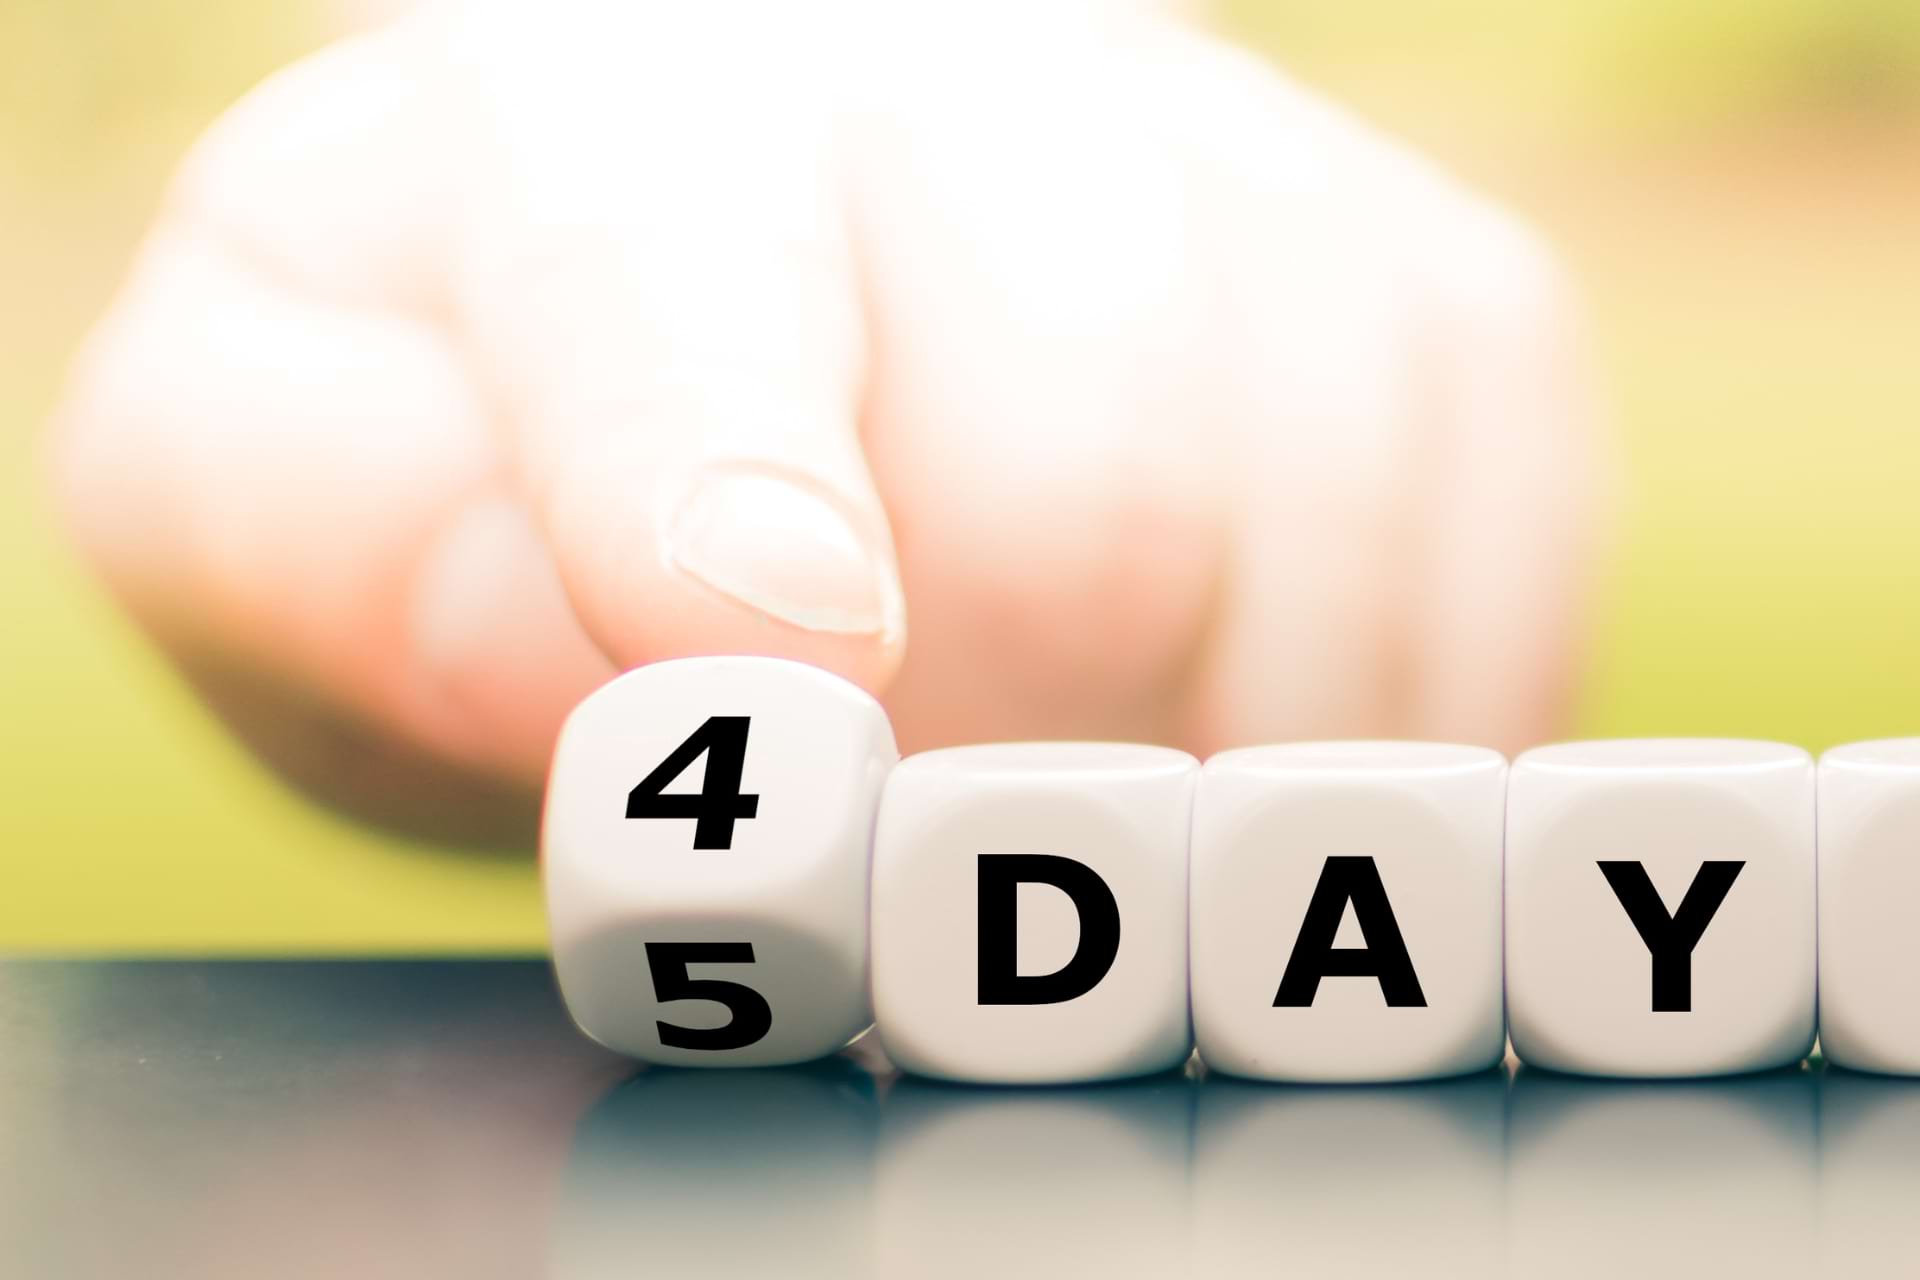 a hand arranging blocks that say 4 DAY